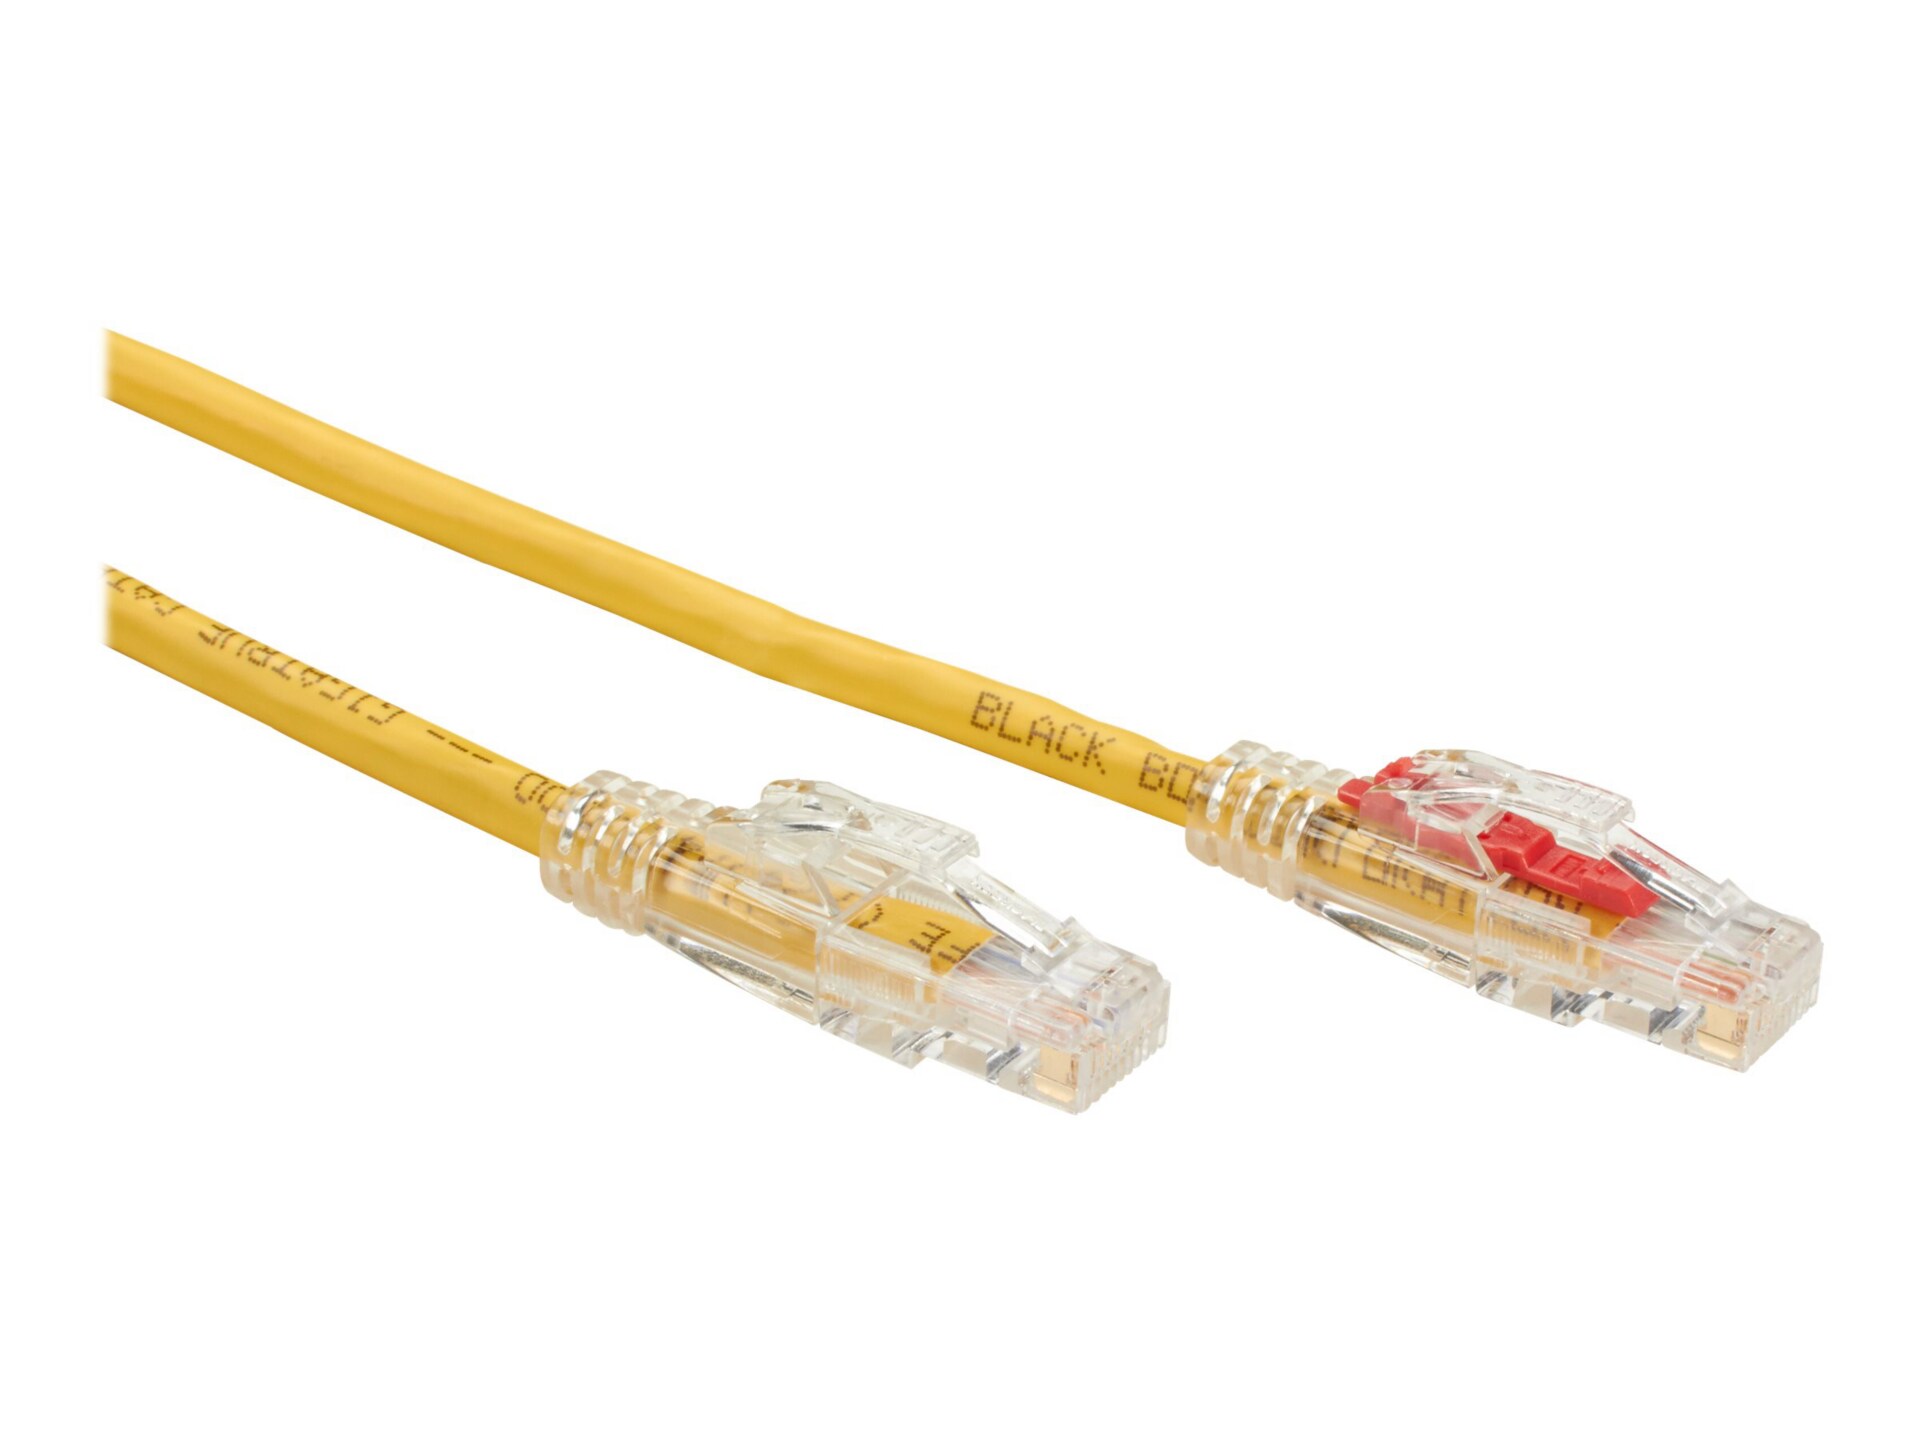 Black Box GigaBase 3 patch cable - 6 m - yellow